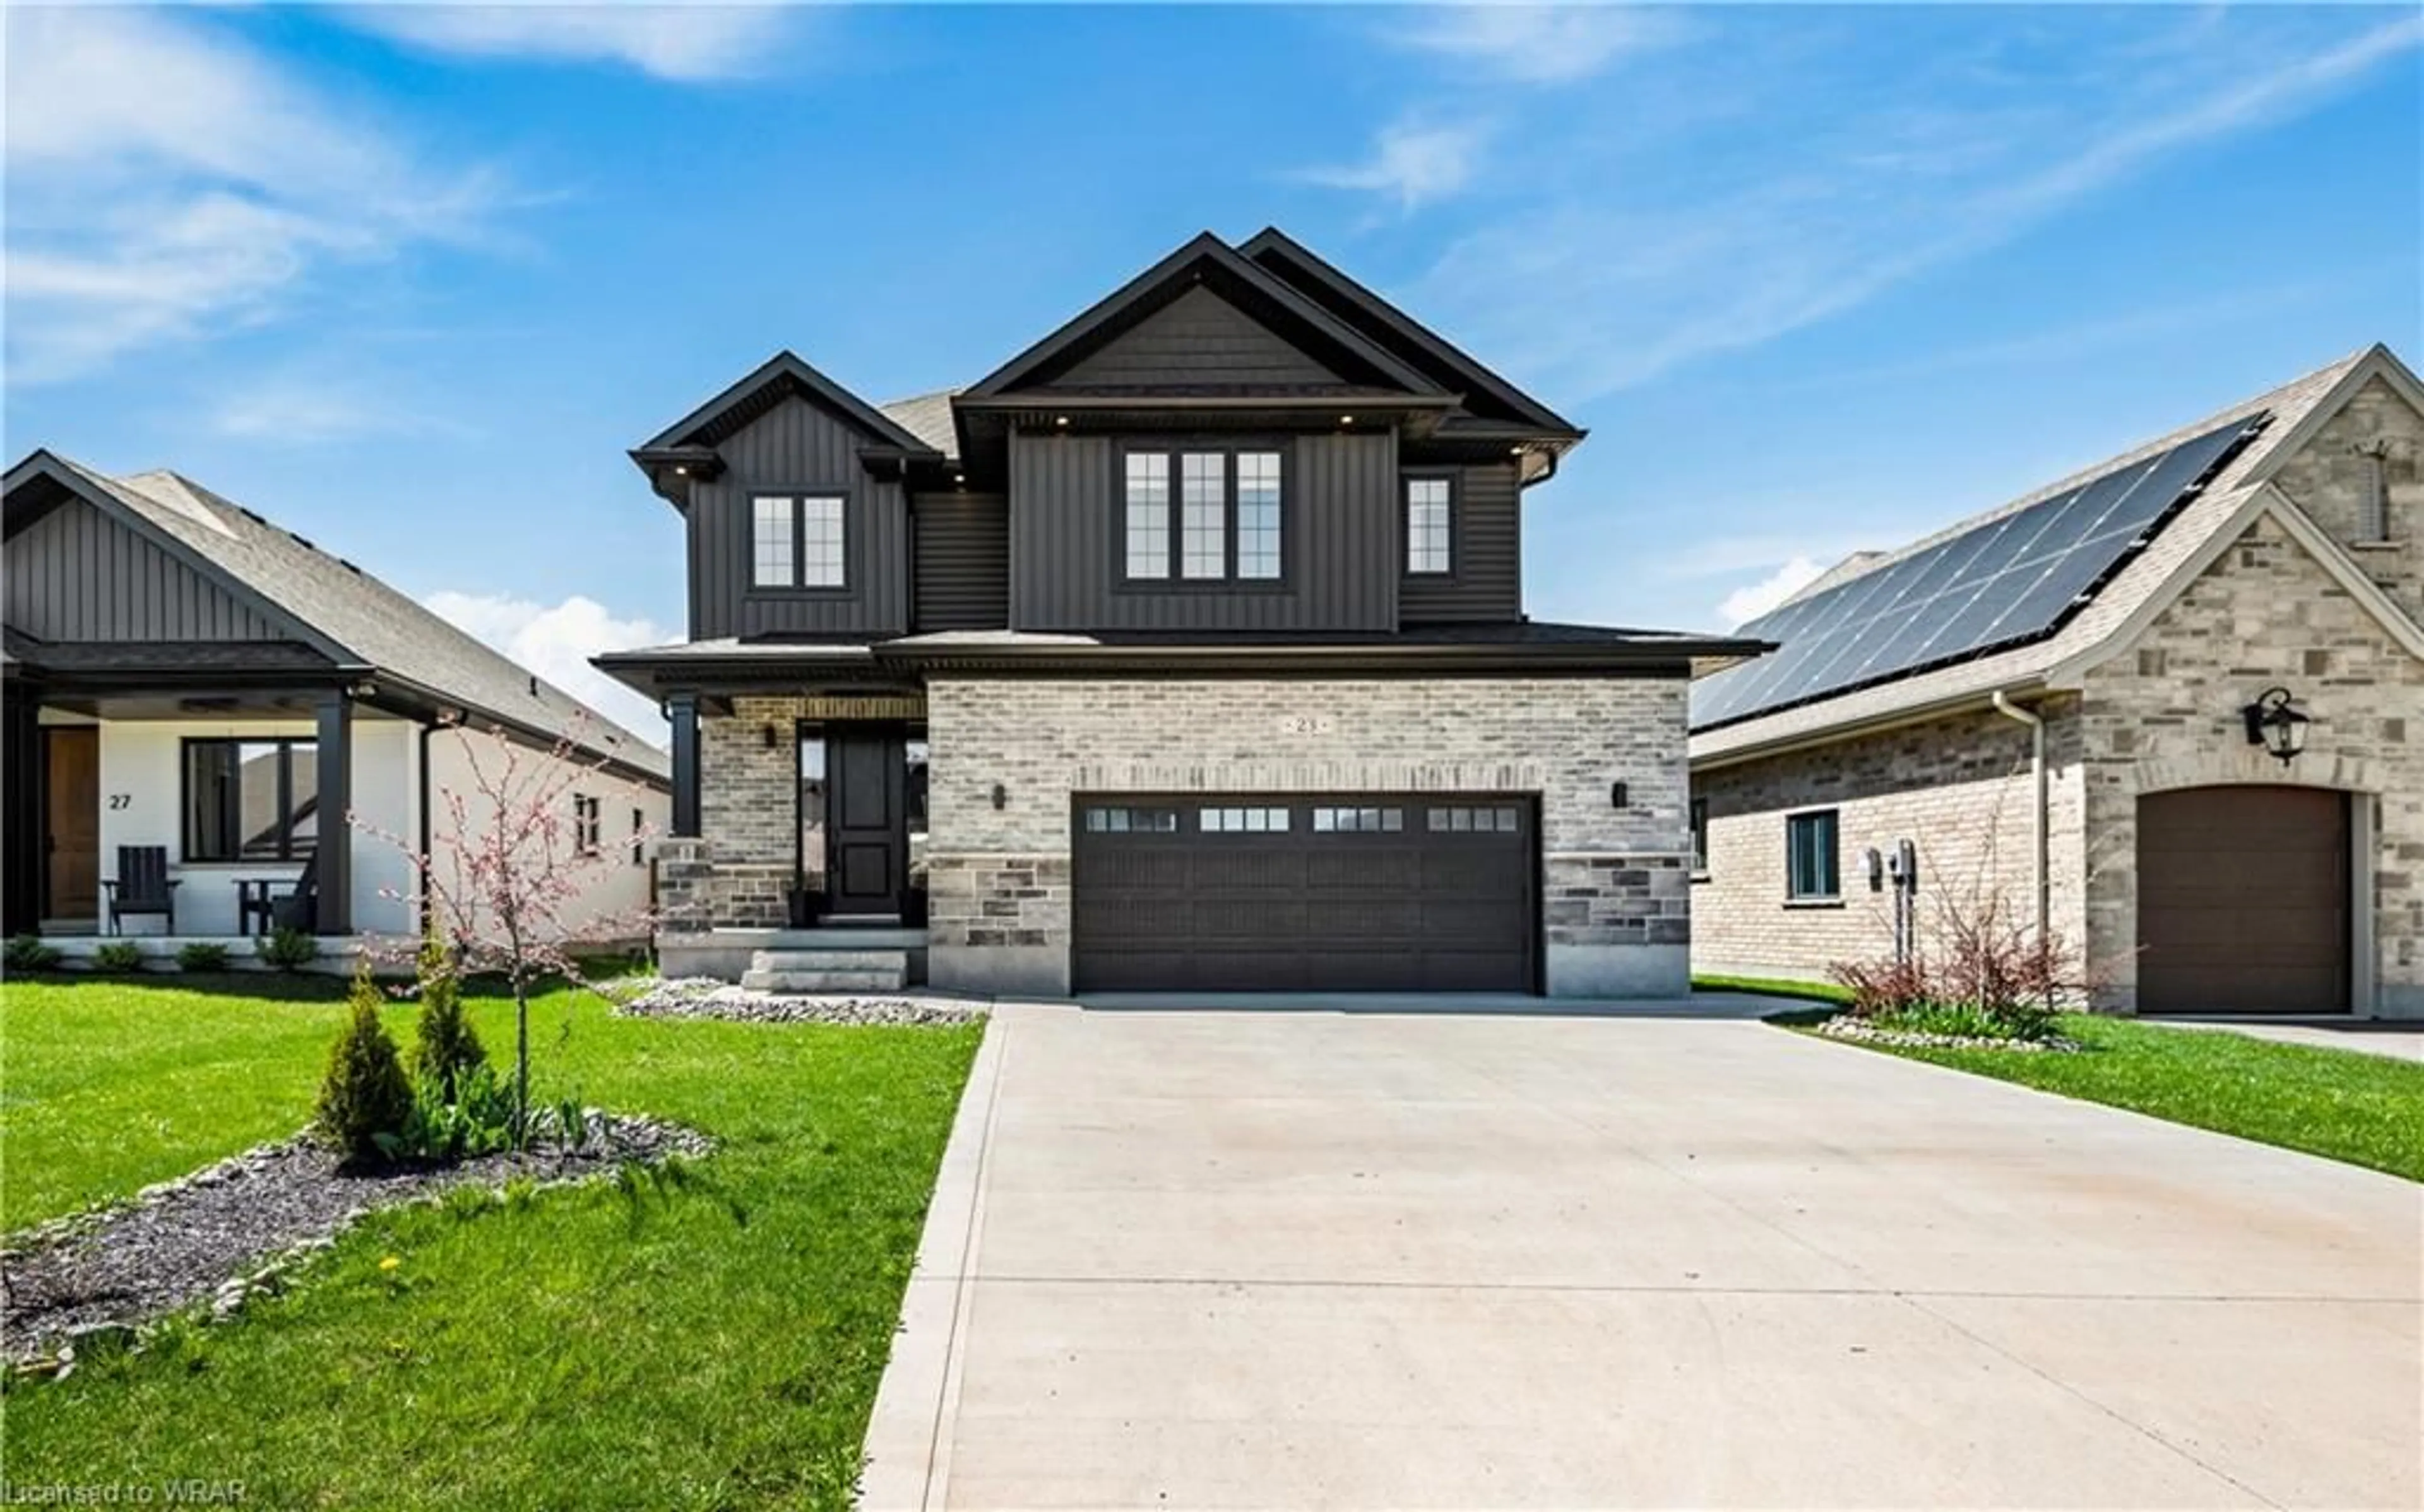 Home with brick exterior material for 23 Carriage Crossing Cross, Drayton Ontario N0G 1P0